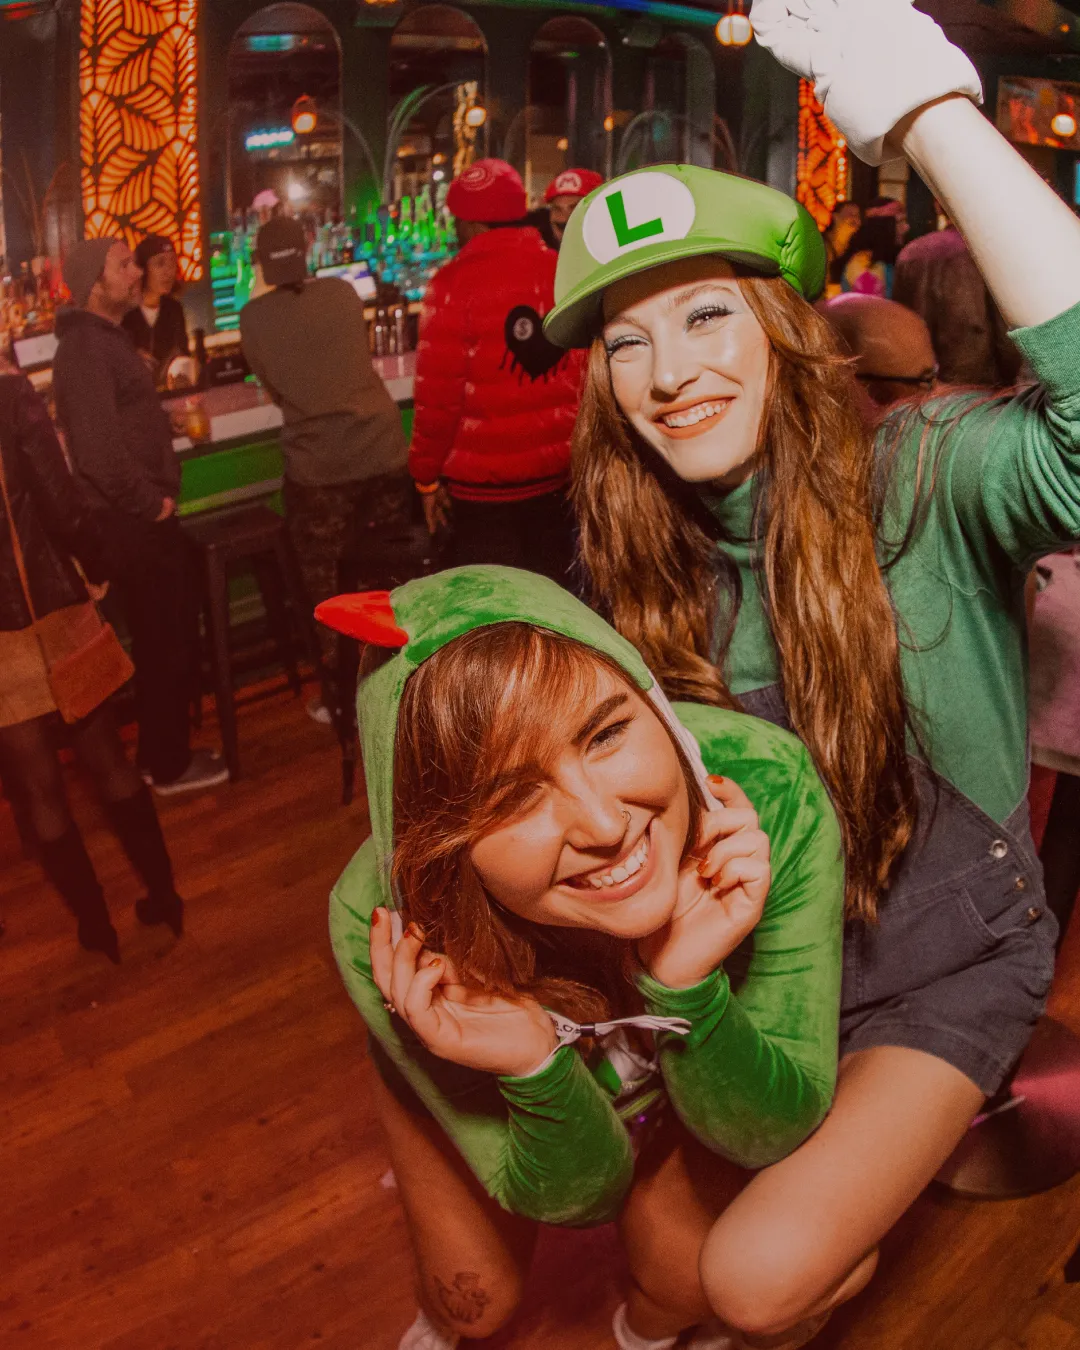 Beneath the bar's dim lighting, a fun friend pair dressed in Mario Cart costumes dance amonst a diverse range of Halloween disguises during the Halloween Bar Crawl
